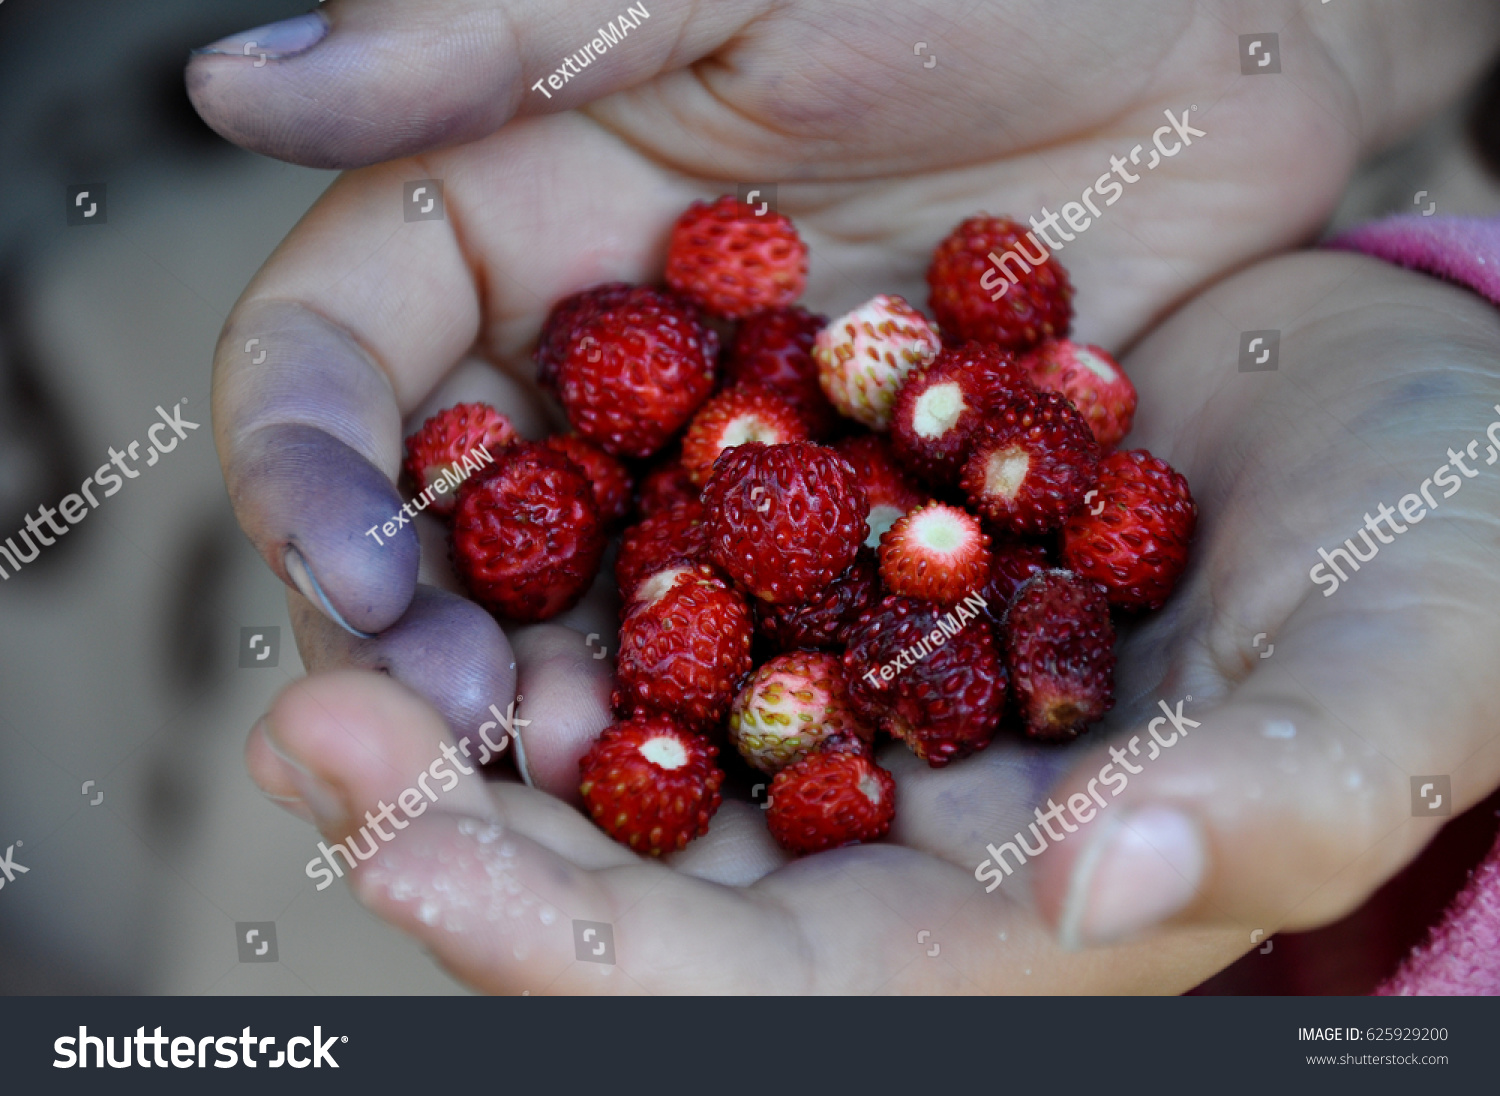 Hands holding strawberries #625929200